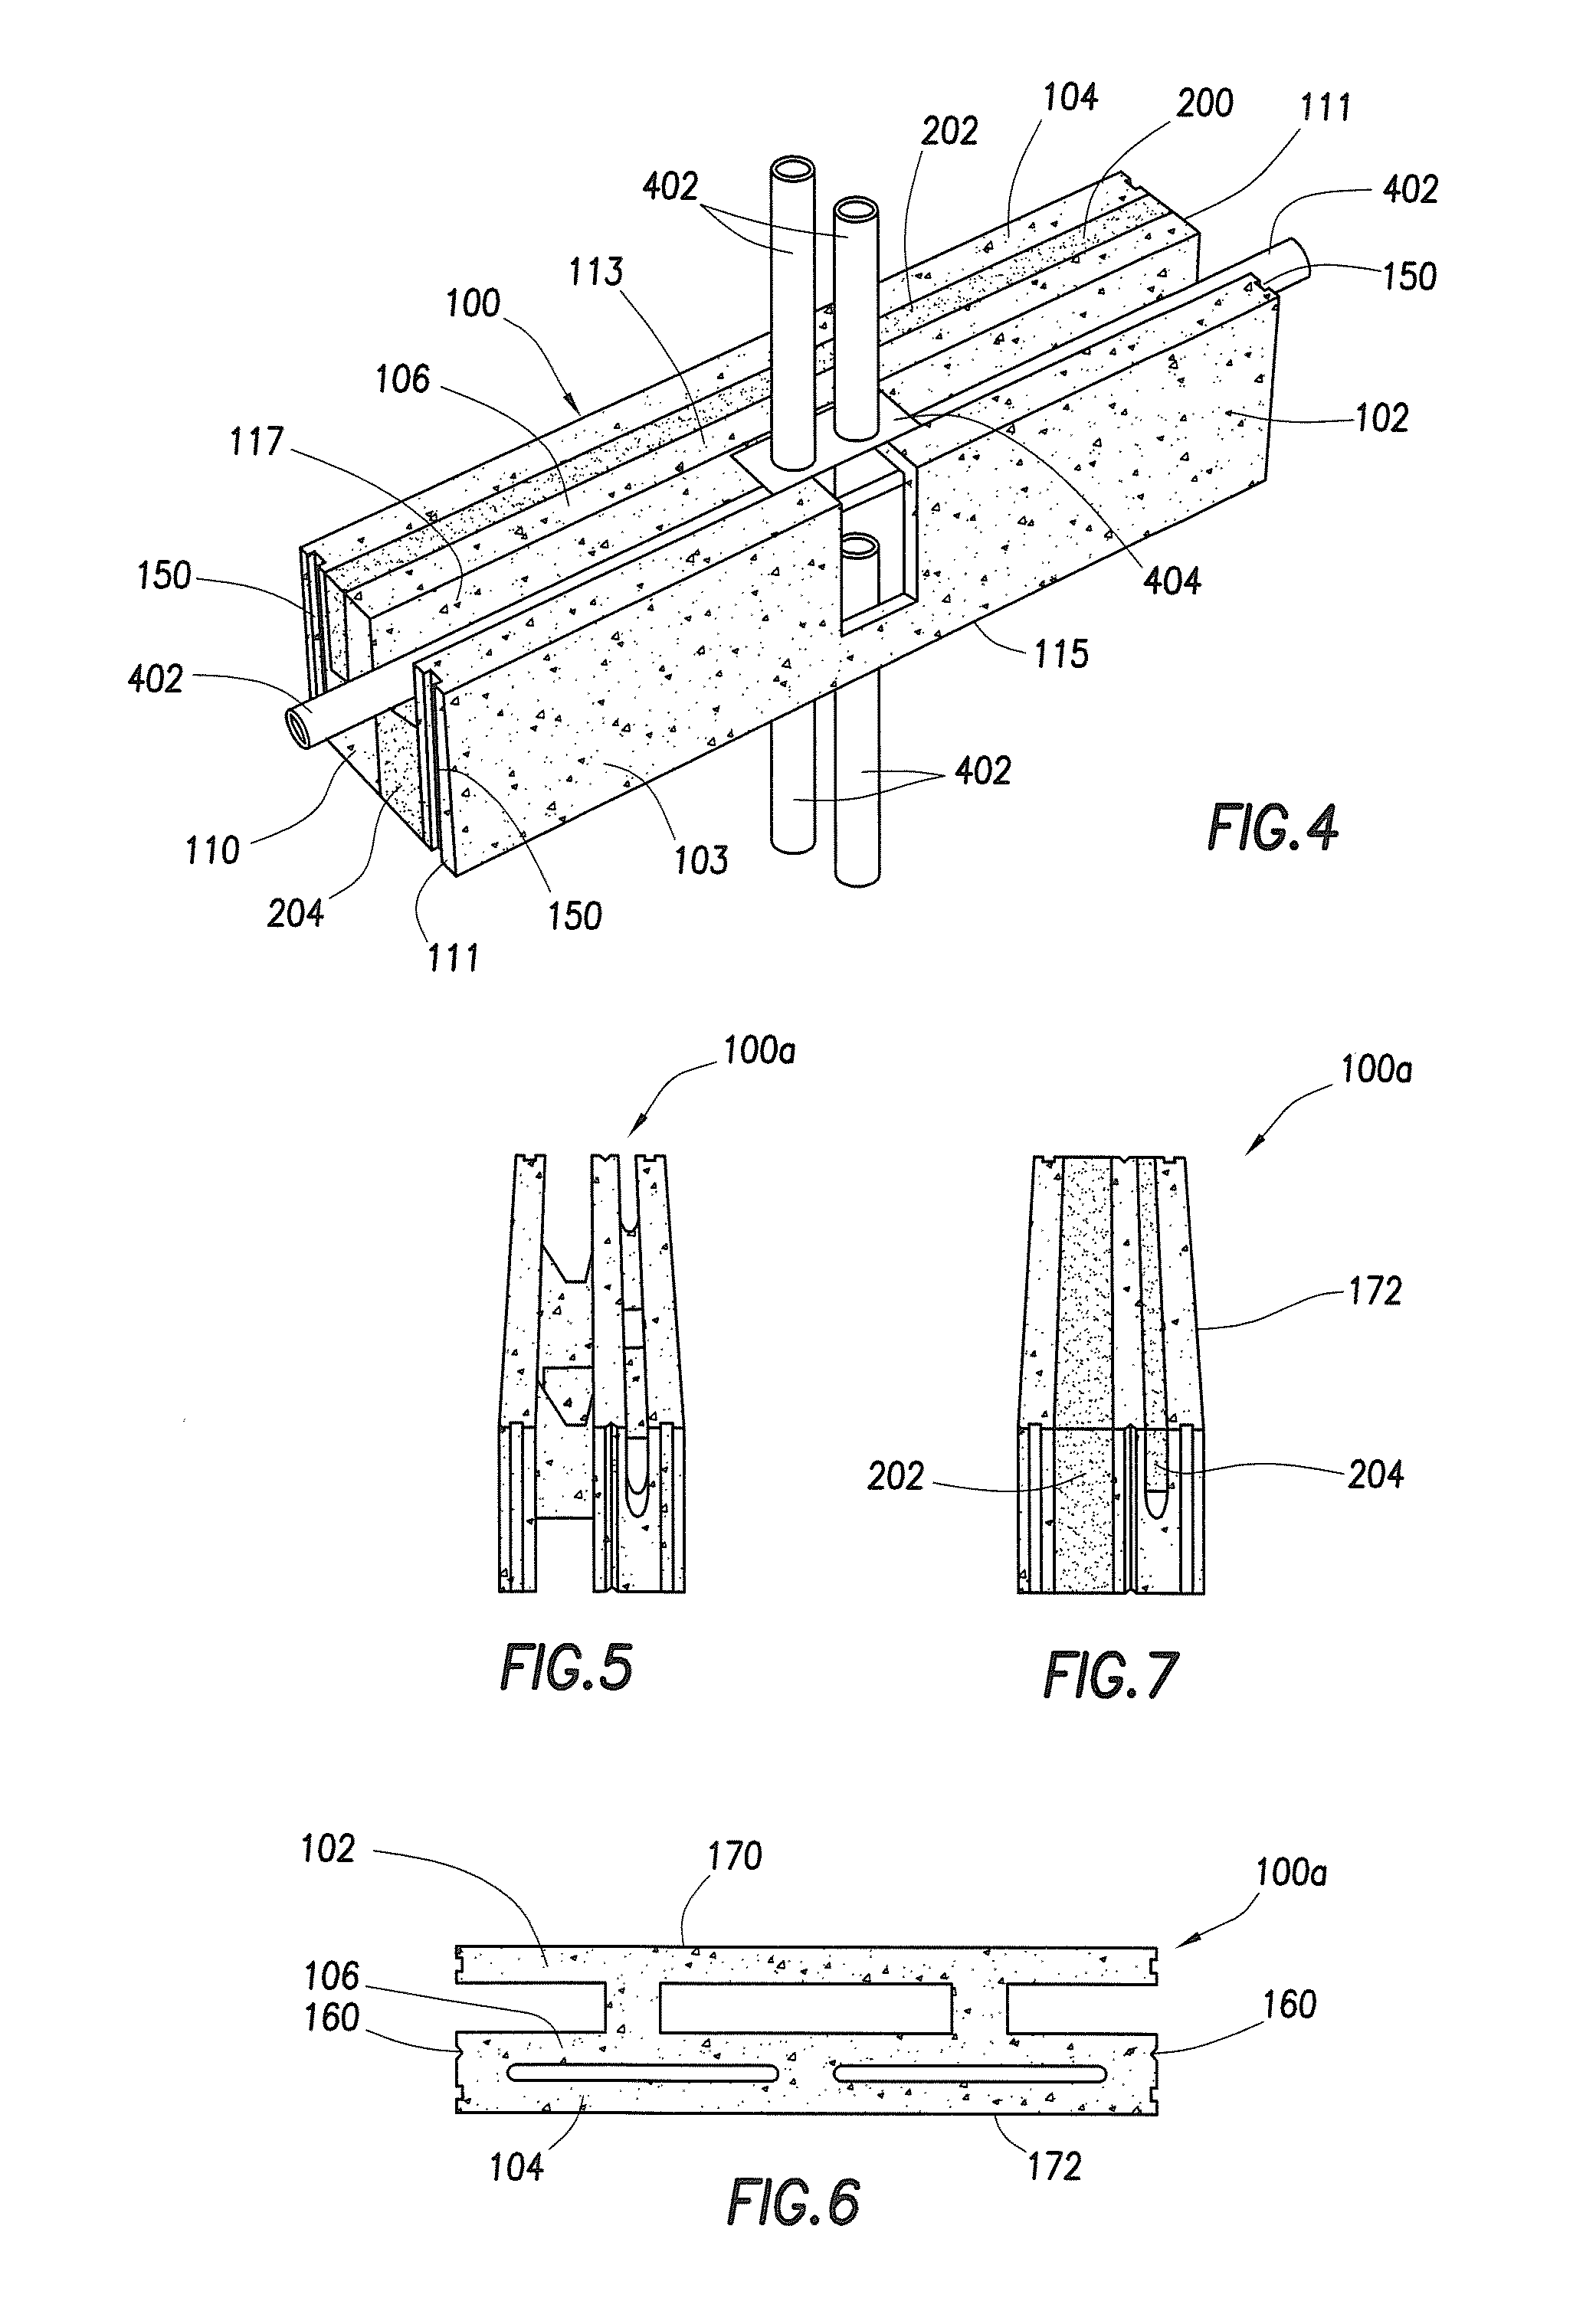 Insulated block with non-linearthermal paths for building energy efficient buildings